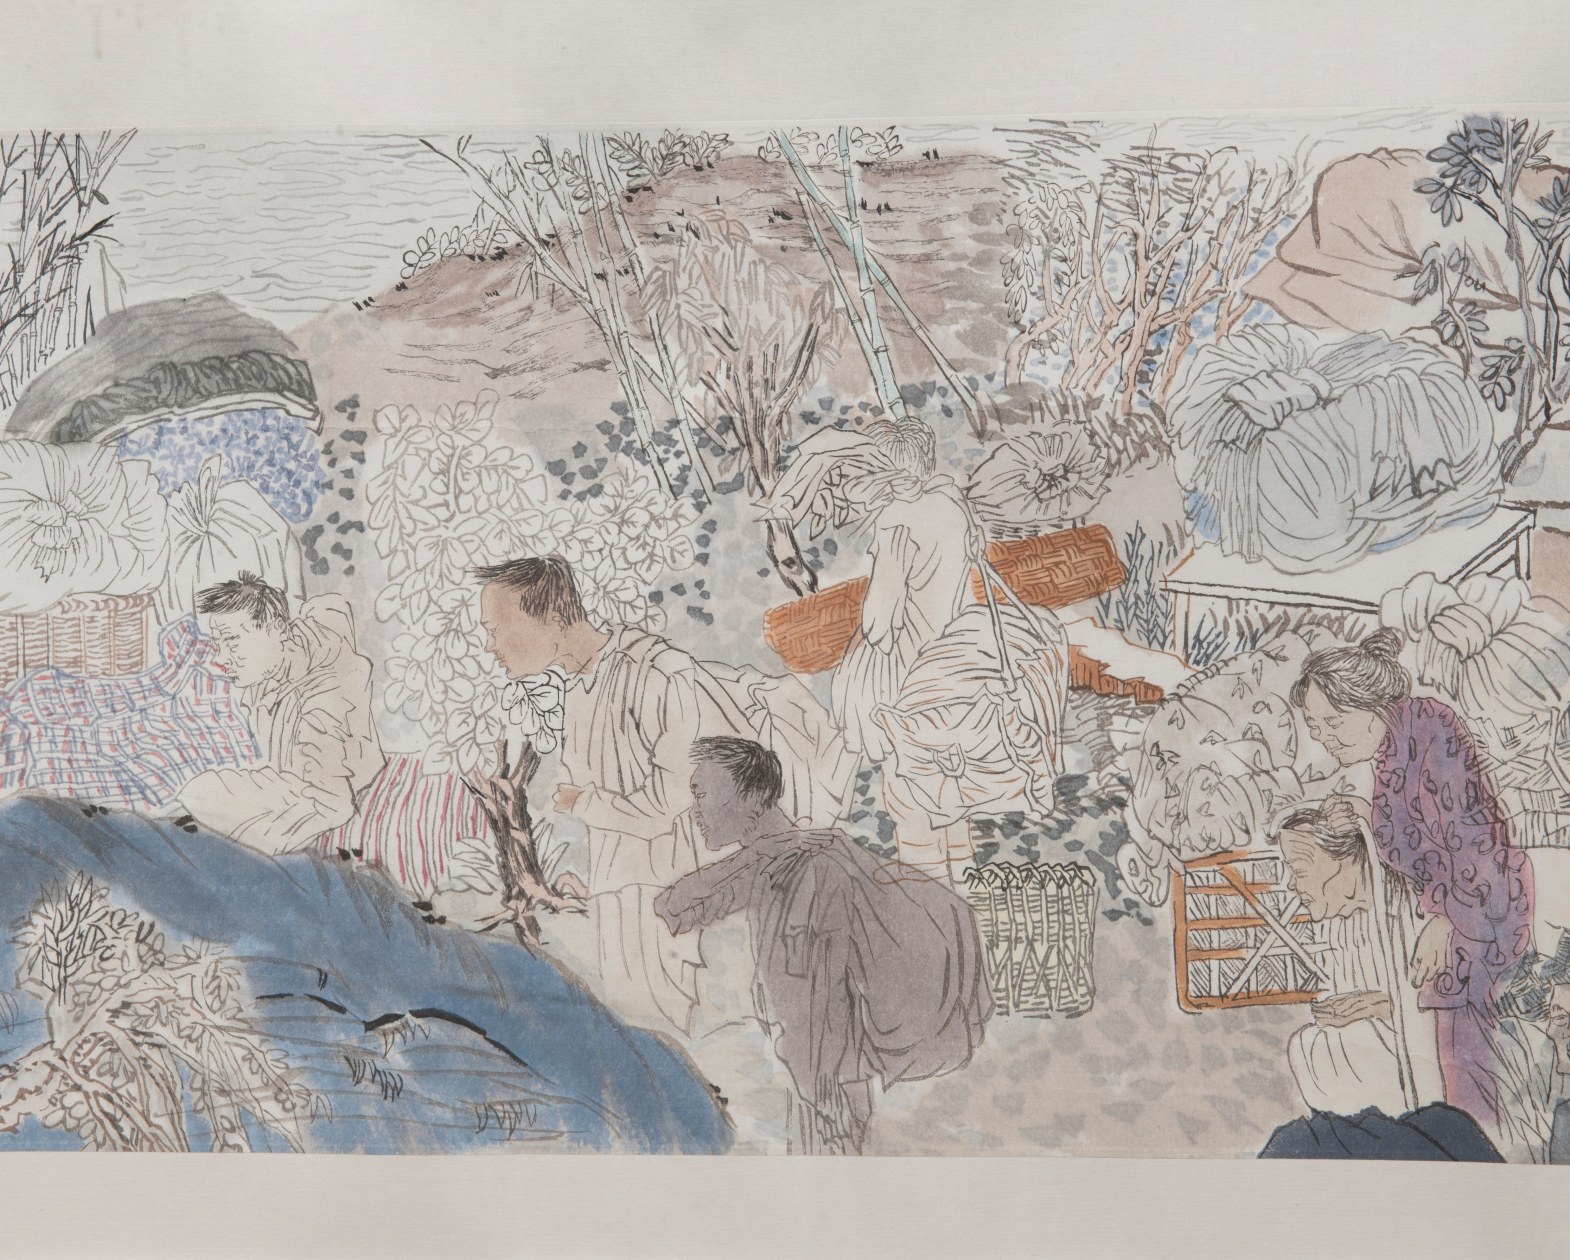 YUN-FEI JI, The Three Gorges Dam Migration, 2009 Hand-printed watercolor woodblock mounted on paper and silk, 15 7/8 x 123 3/4 in.